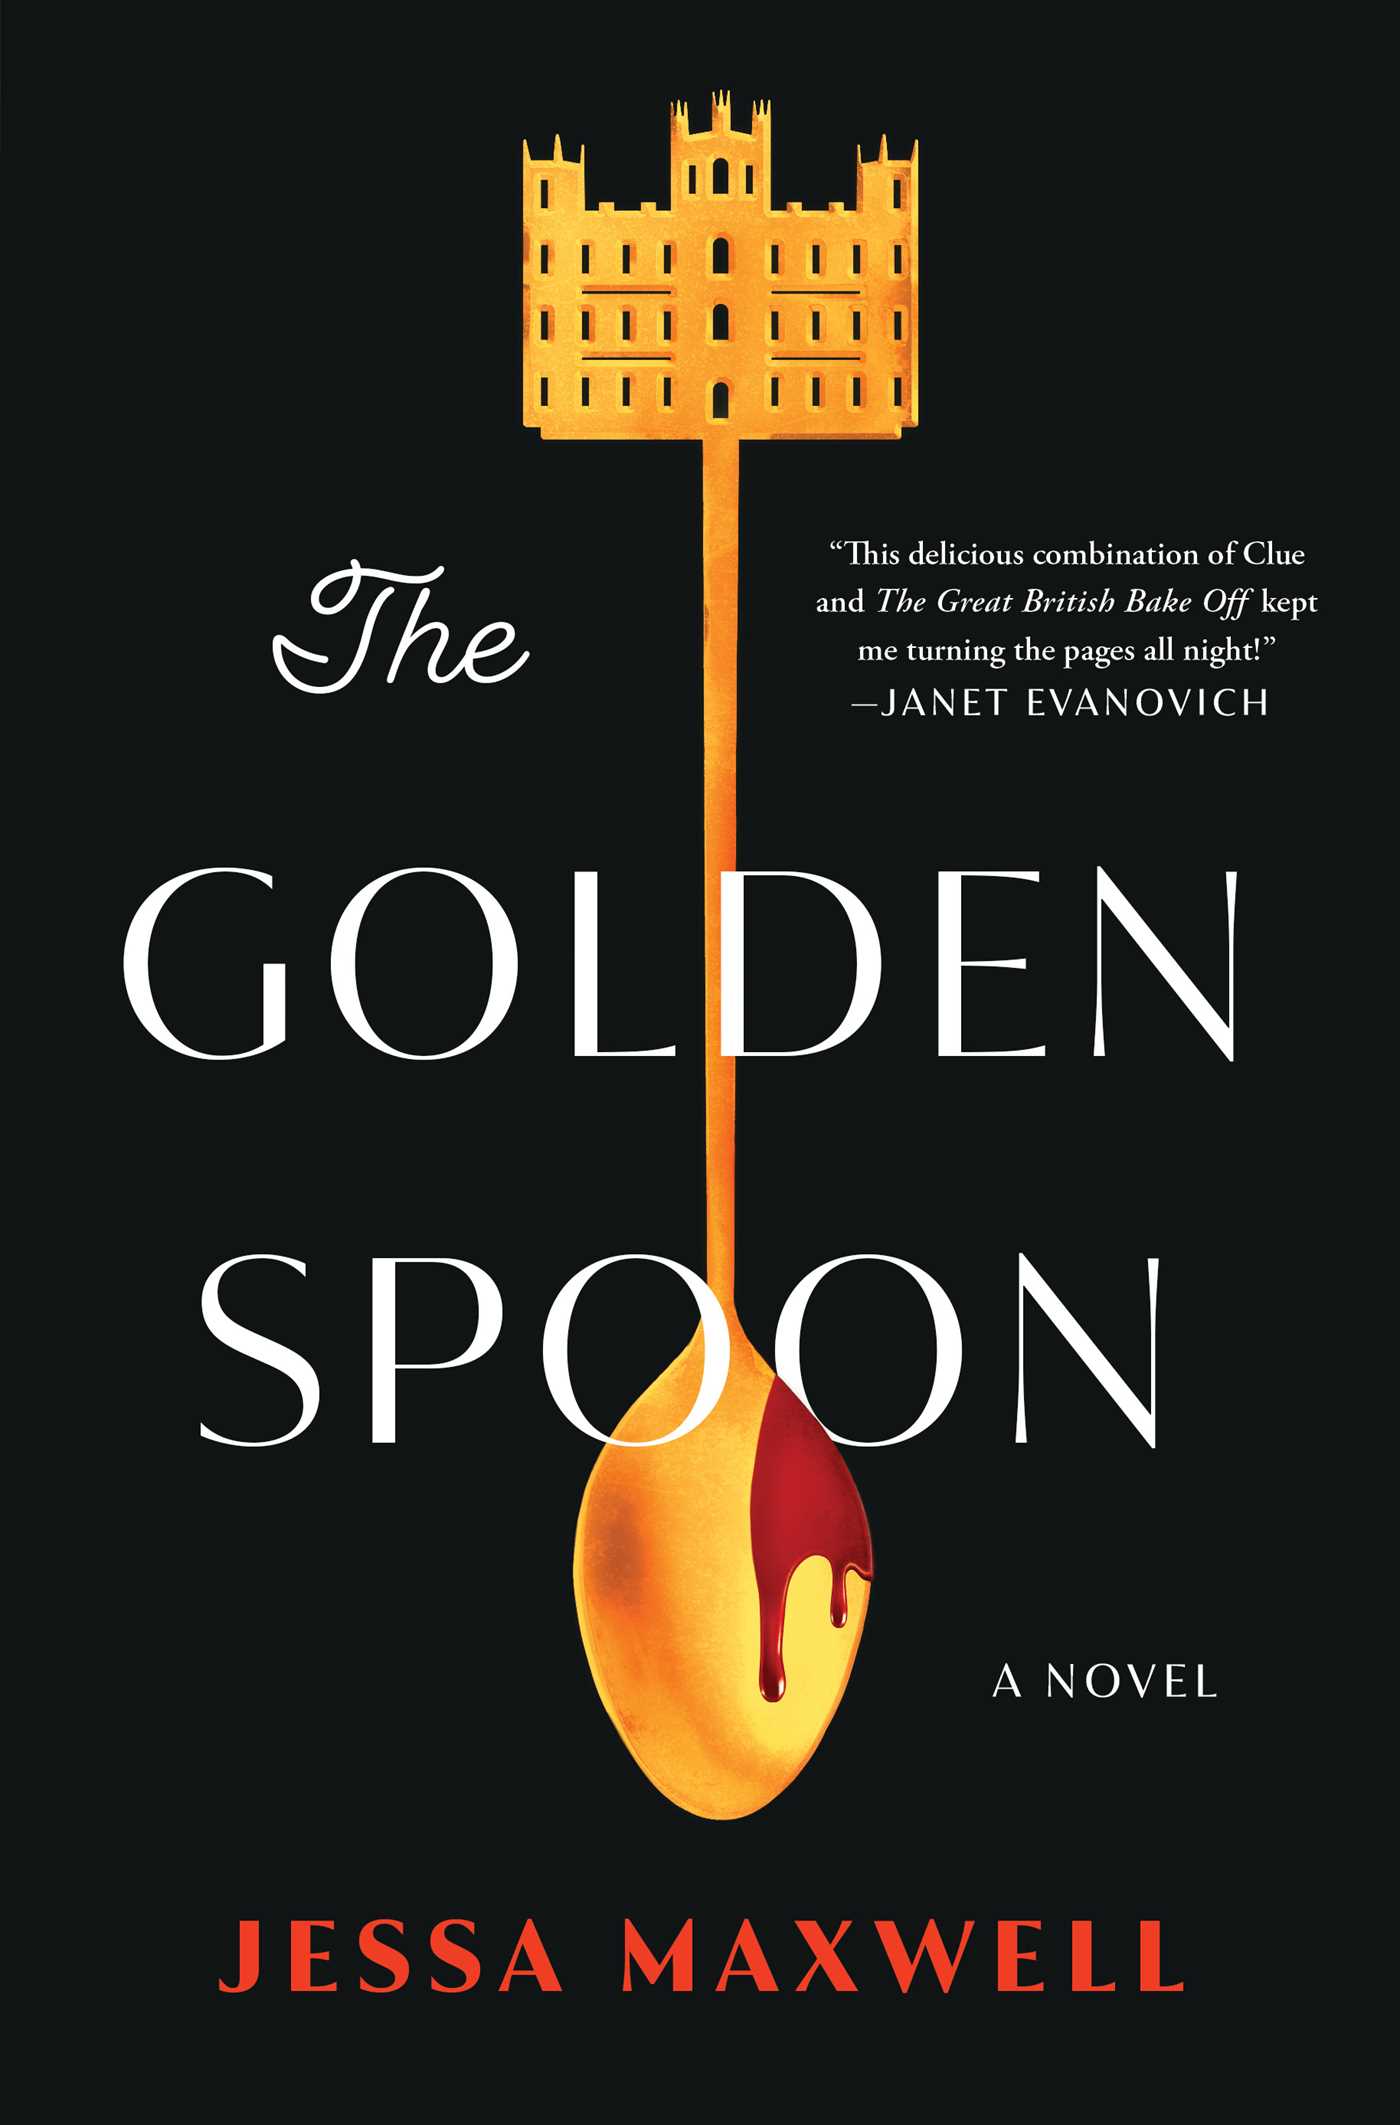 The Golden Spoon book cover. 